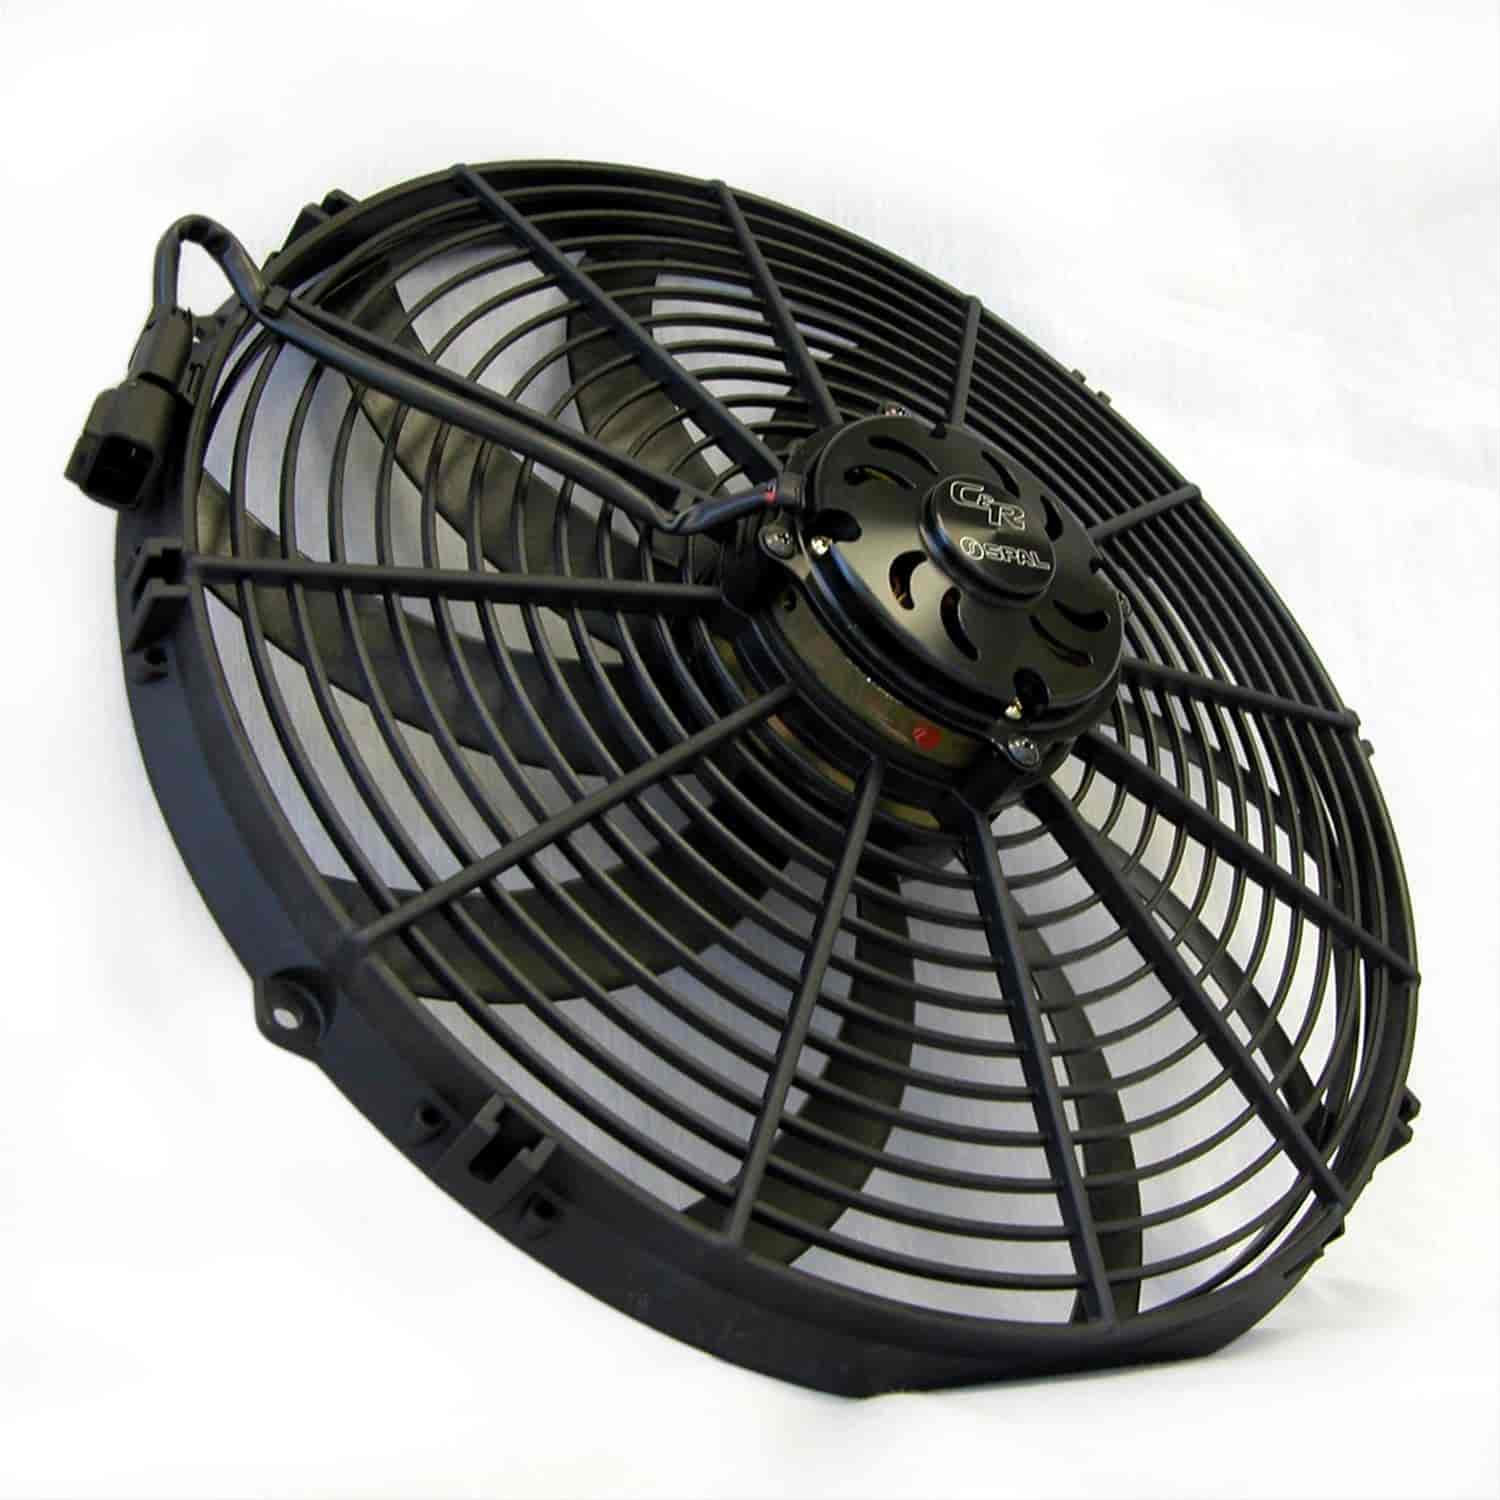 Spal Dual 11 Fans with Carbon Hydro Dip Finish - Black Matte